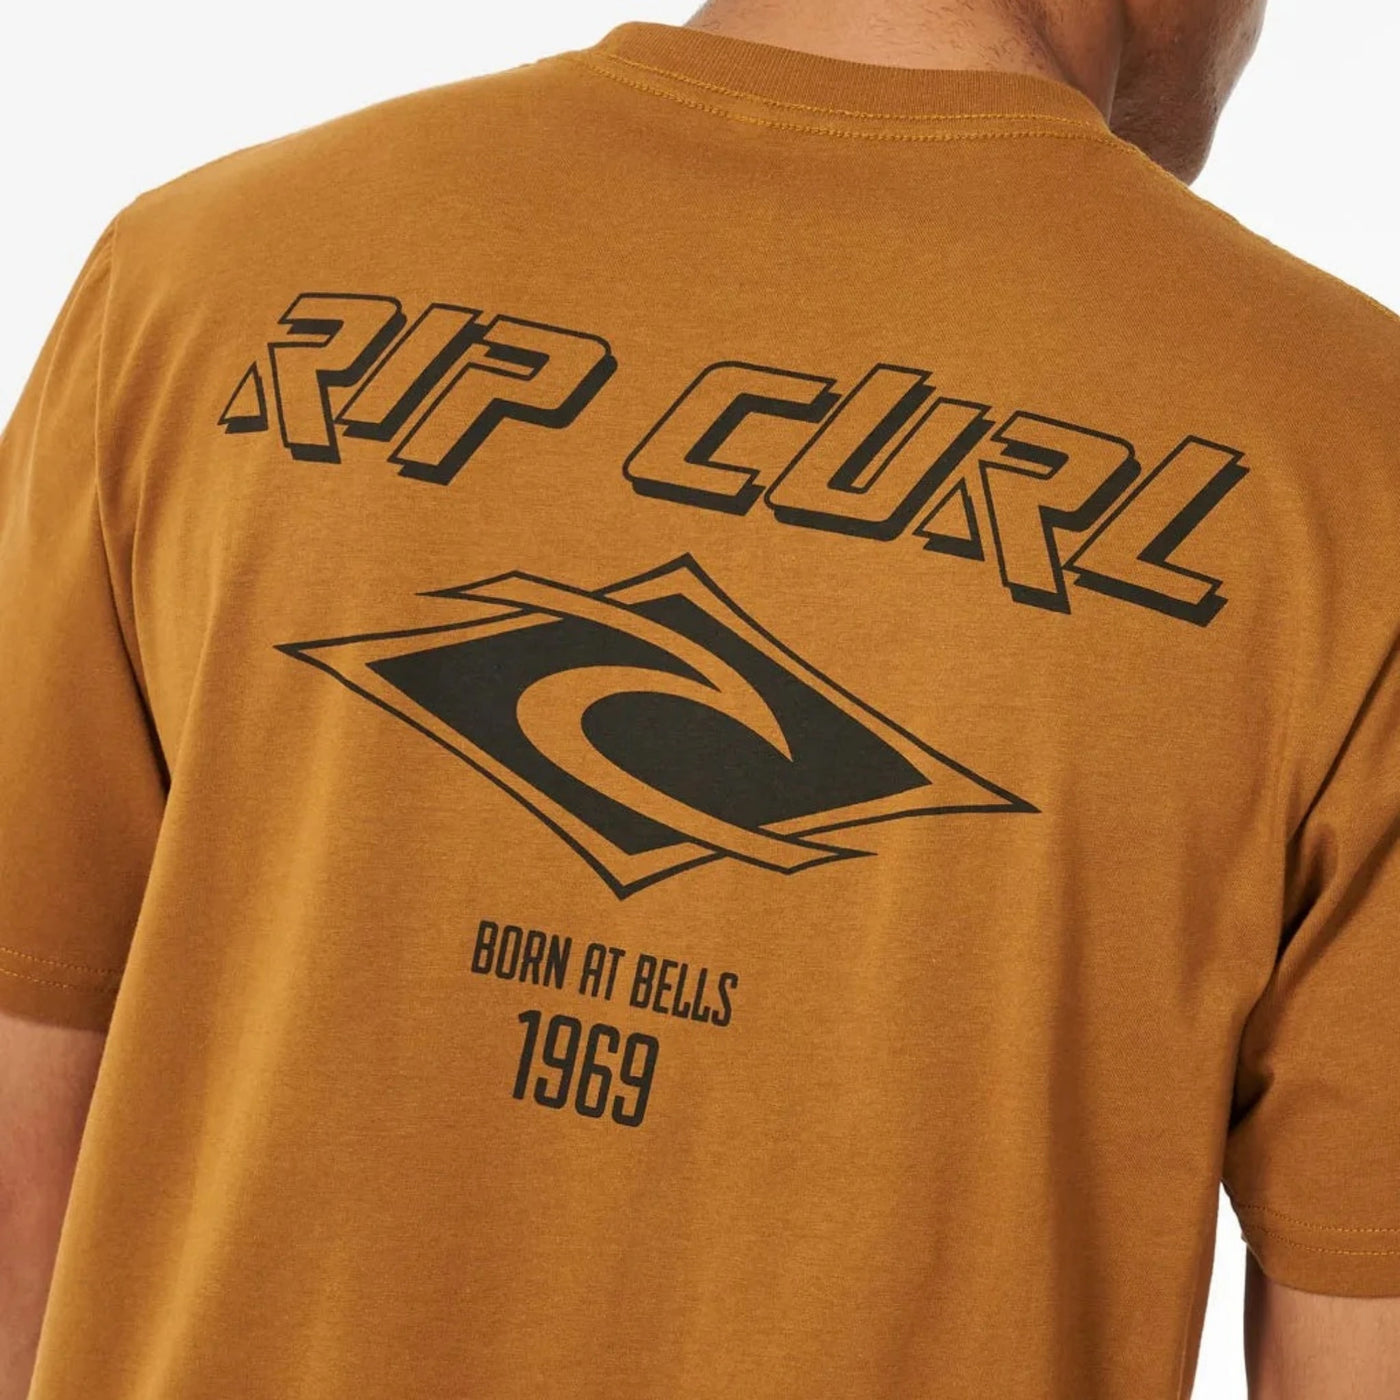 Rip Curl Fade Out Icon Tee - Gold